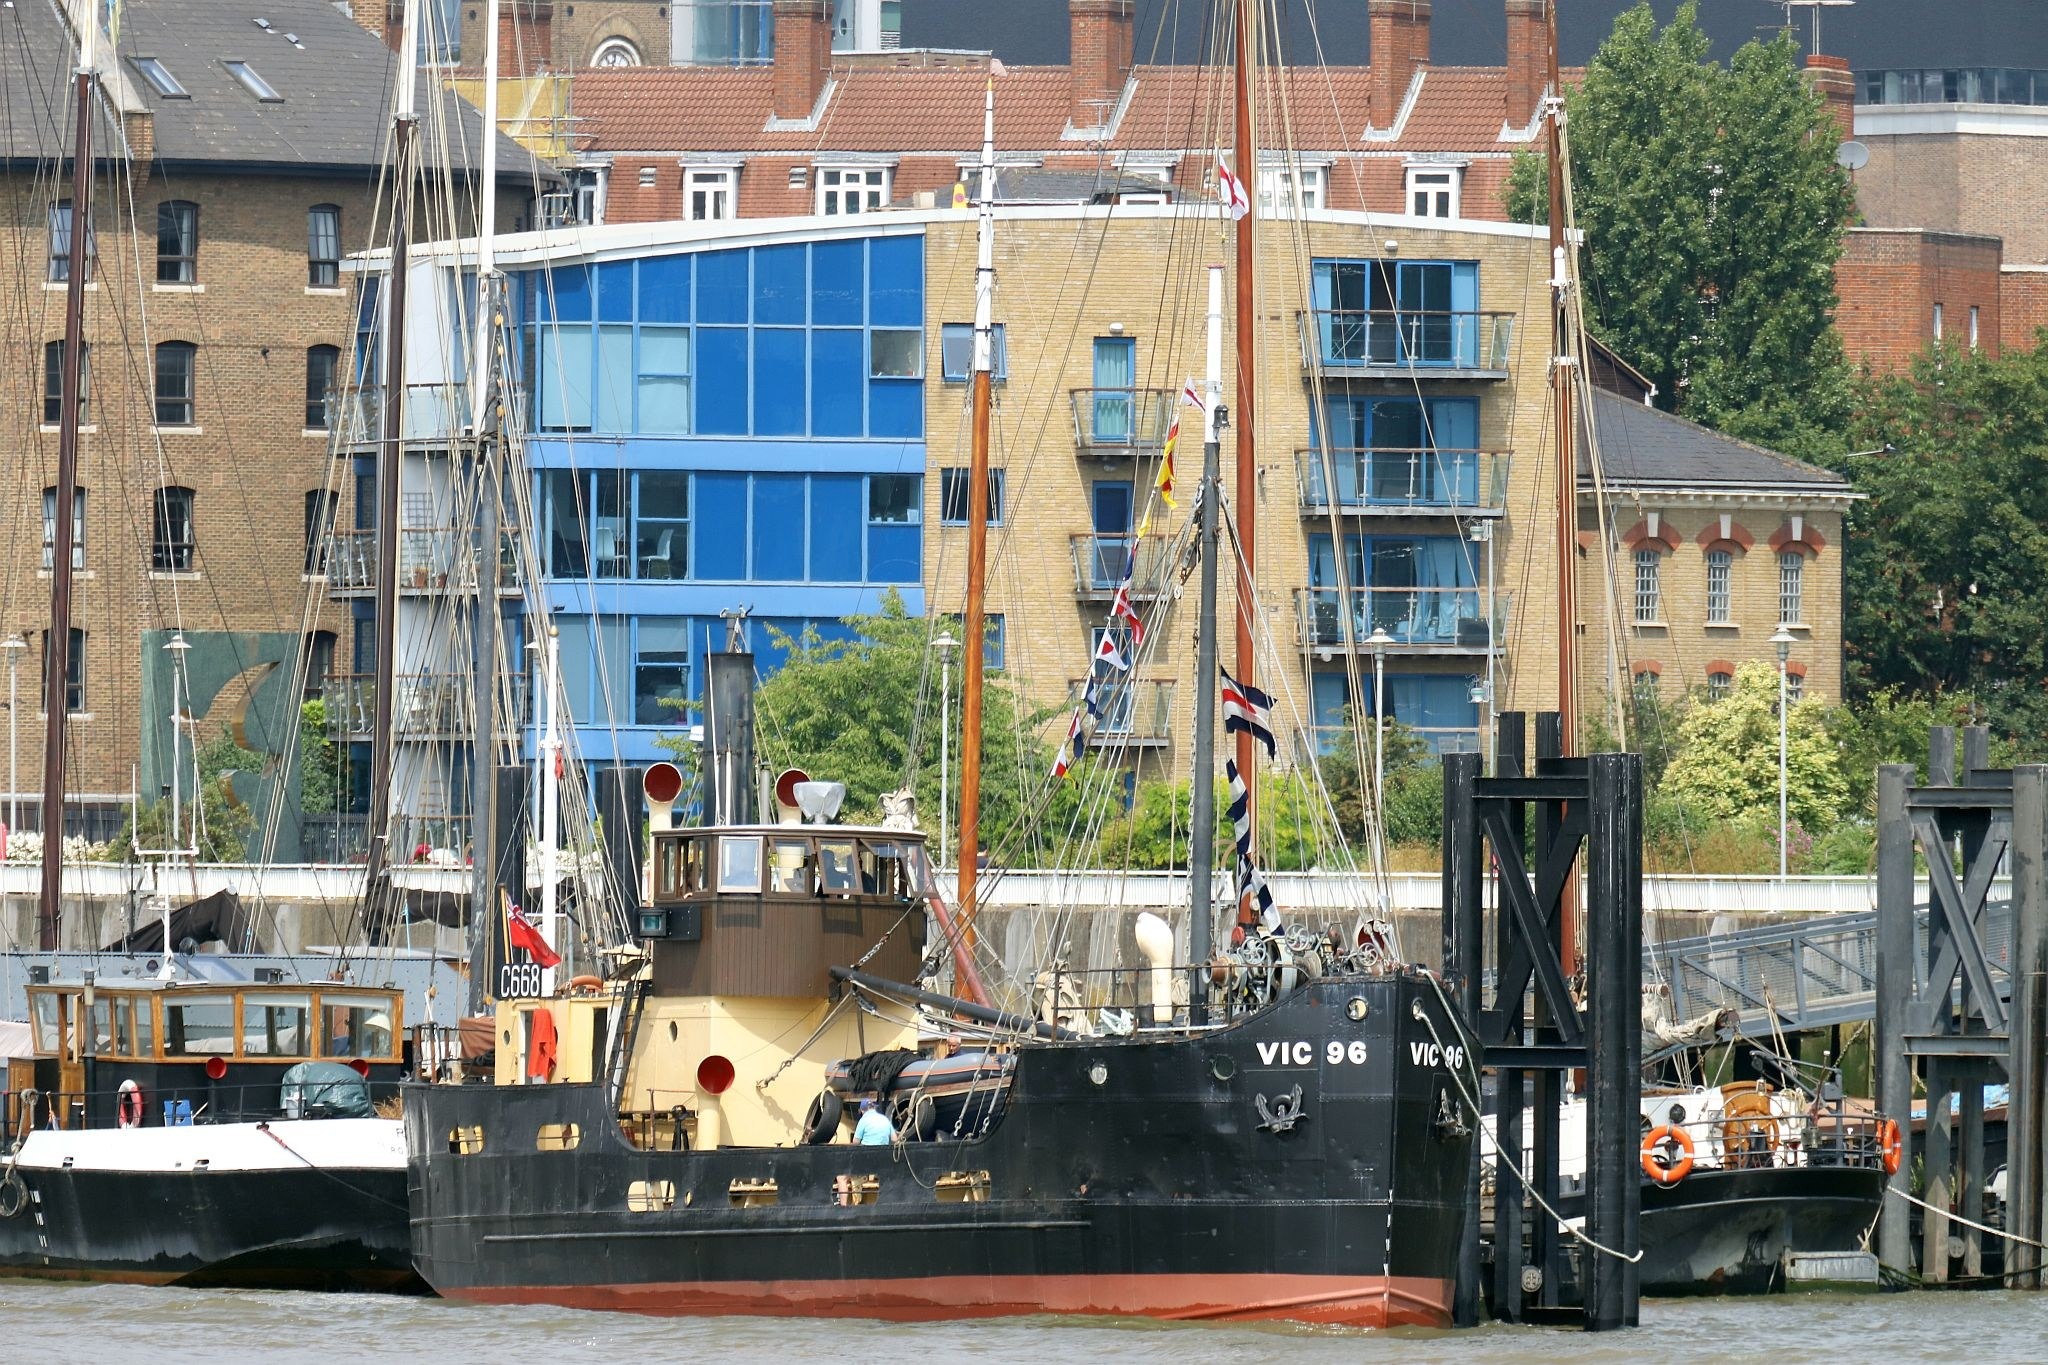 VIC 96 tied up alongside Hermitage Moorings in central London by Tower Bridge. Steam powered ship VIC 96 visited central London in June 2023.